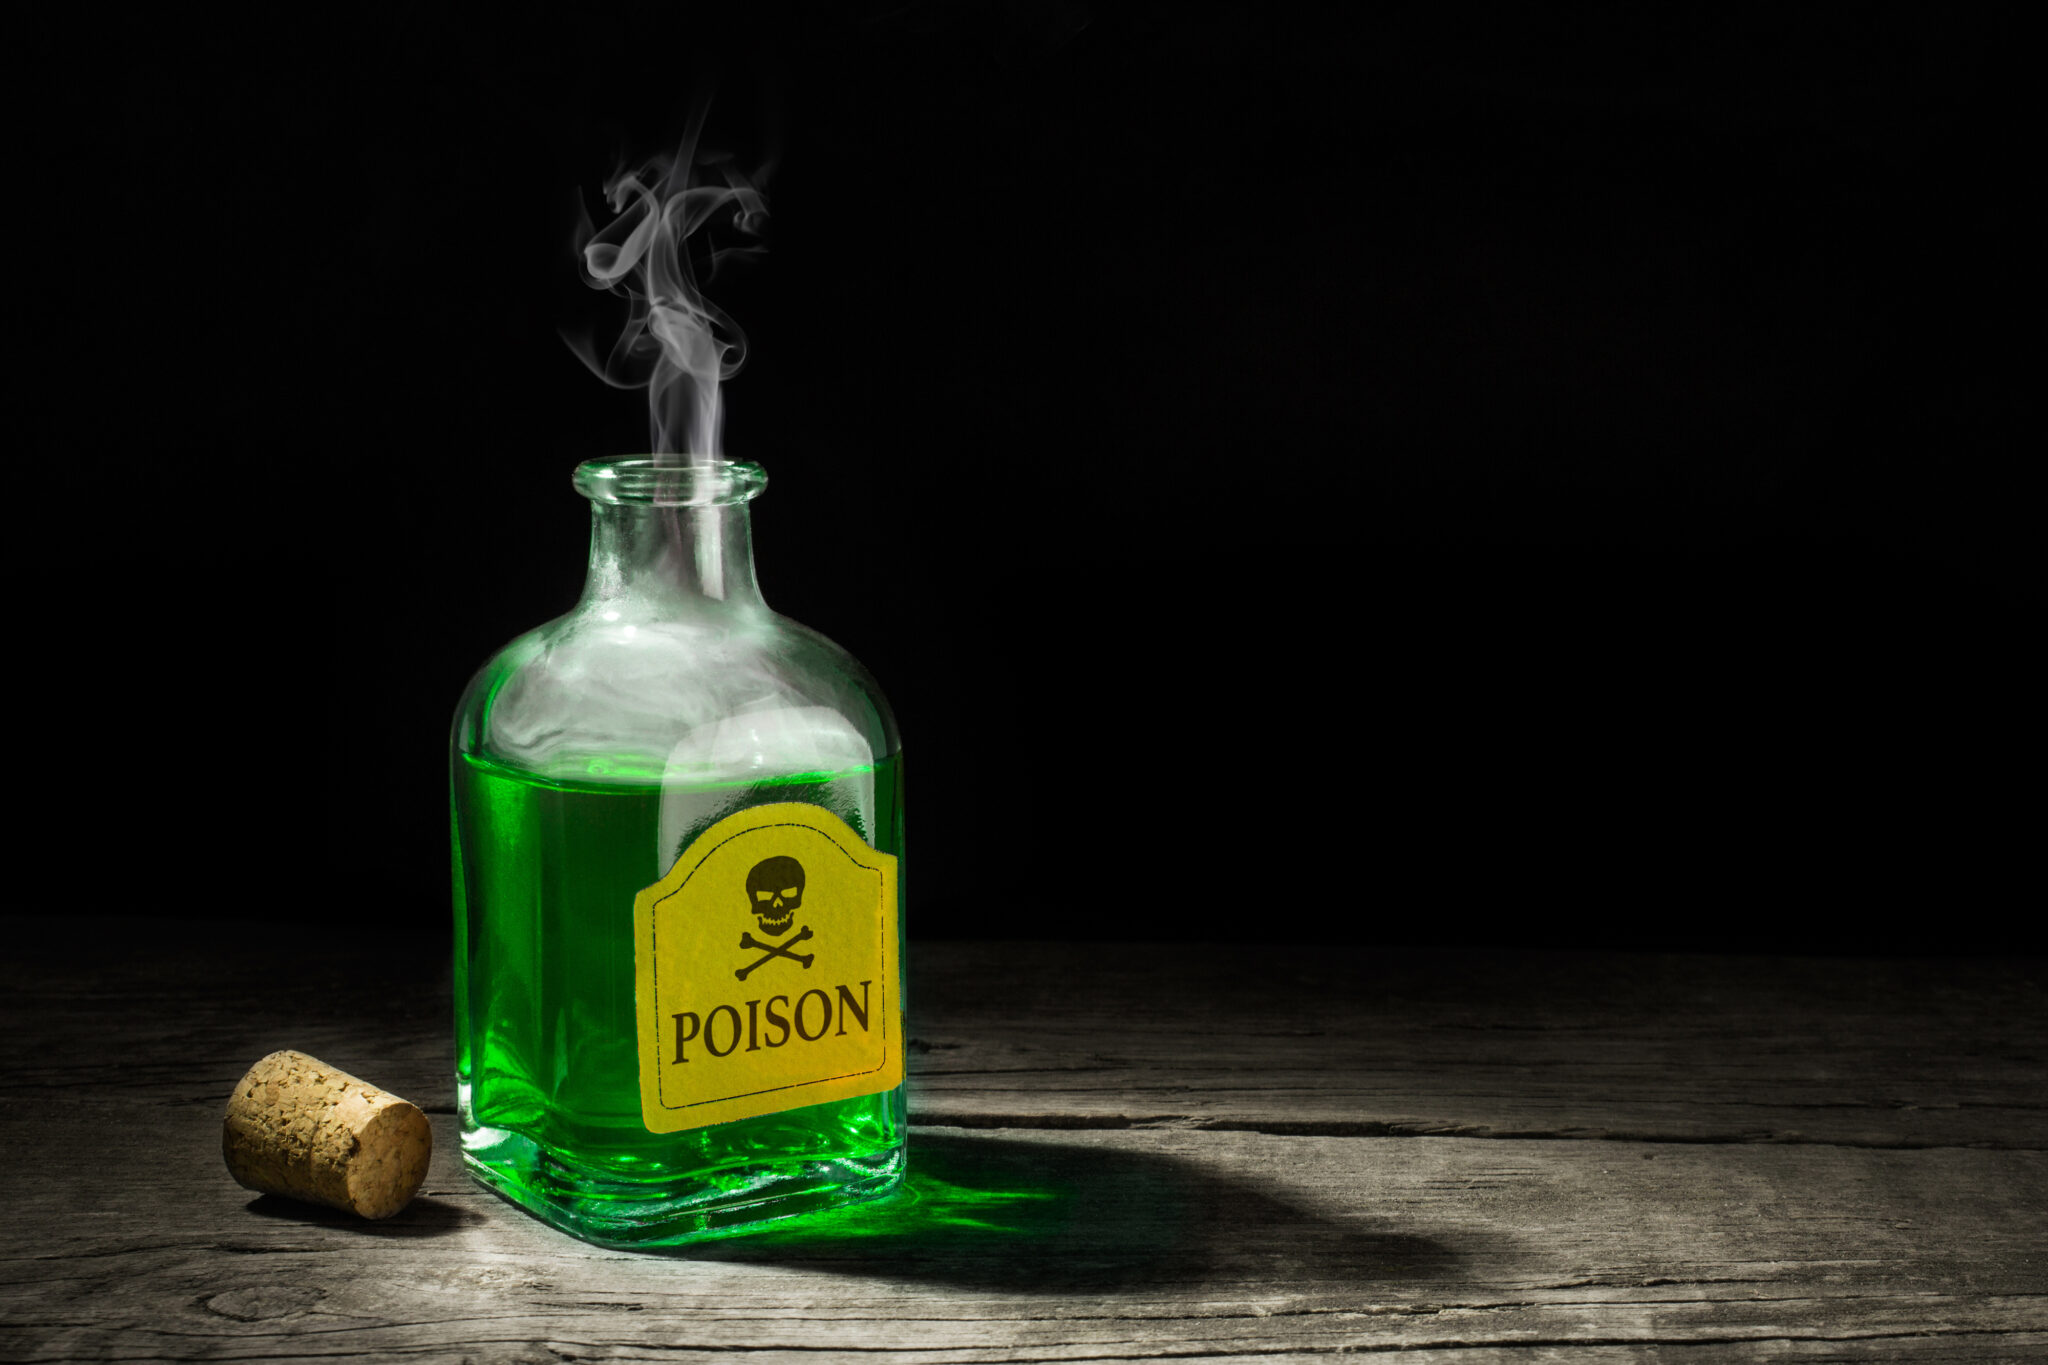 What is a poisoned cue? 